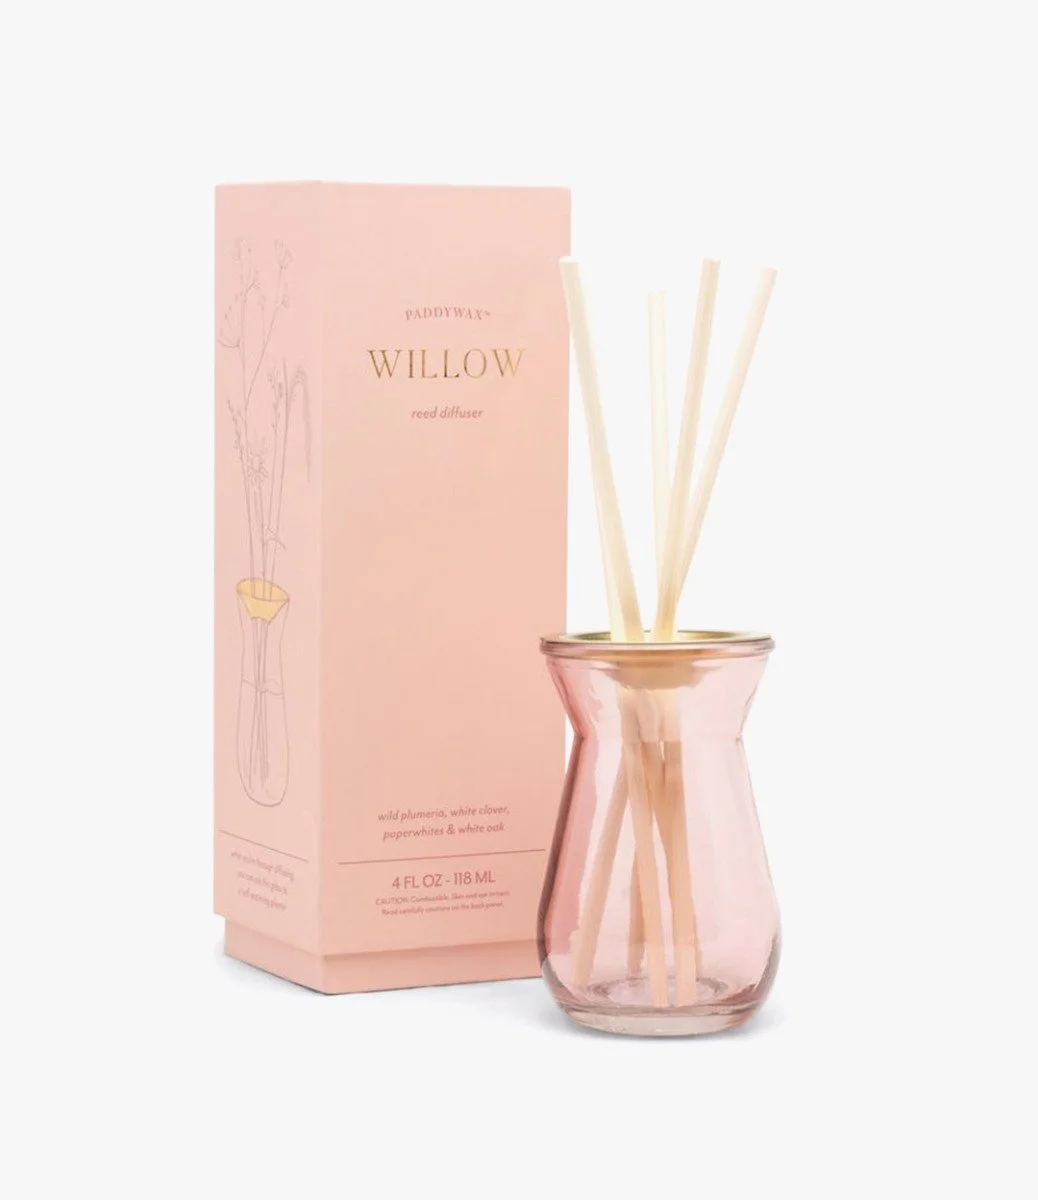 Flora Bulb 4fl oz Pink Glass Diffuser Willow by Paddywax